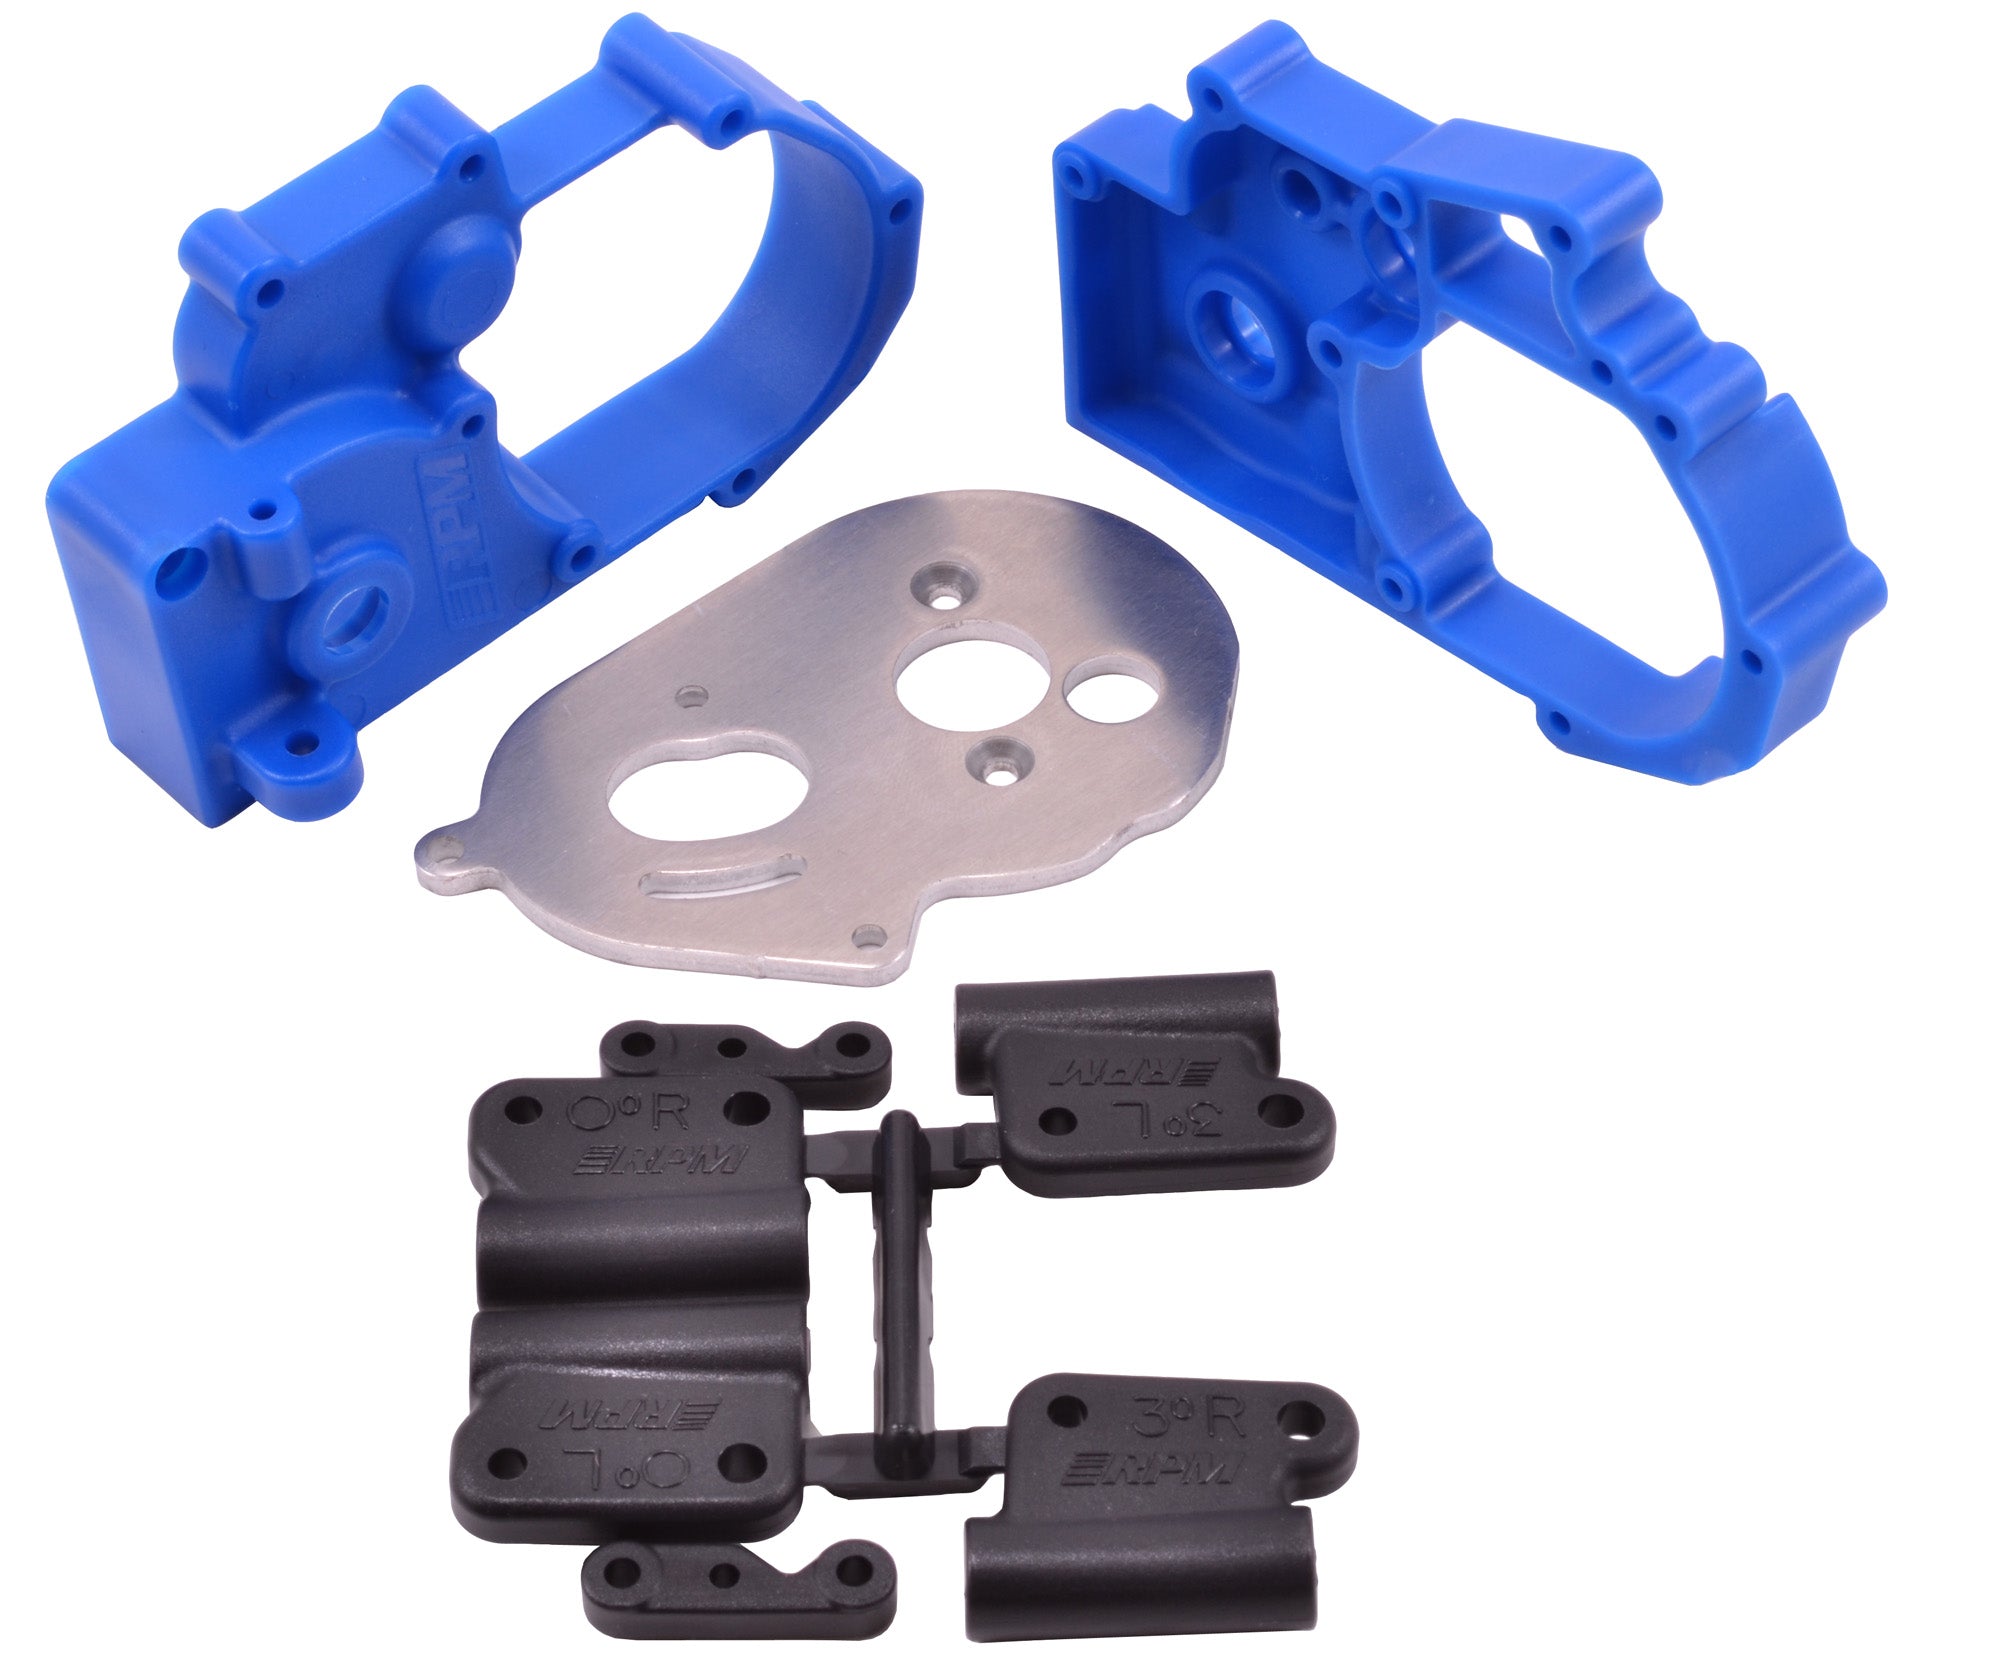 RPM RC Products: Gearbox Housing and Rear Mounts for the Traxxas Slash 2wd, e-Rustler, e-Stampede & Bandit